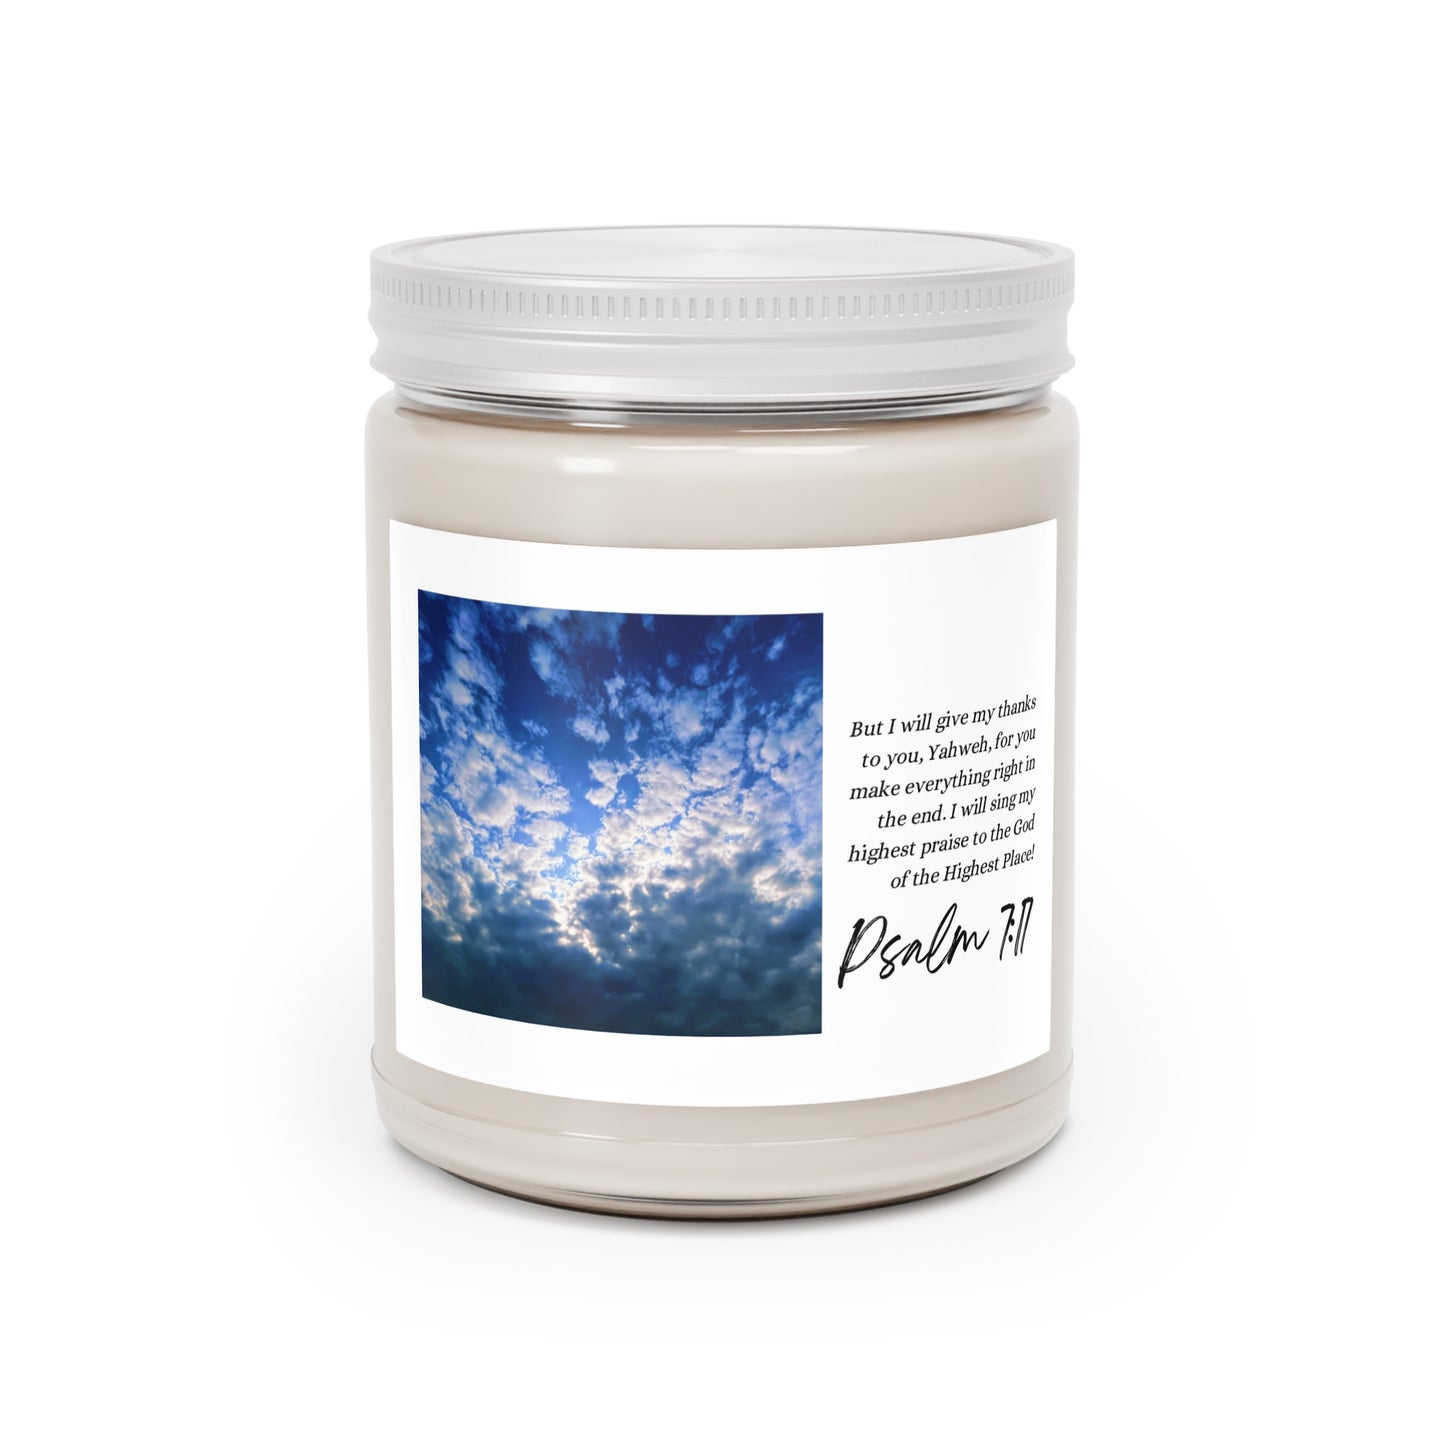 "YOU MAKE EVERYTHING RIGHT IN THE END", Psalm 7:17, Bespoke Scented Candles,